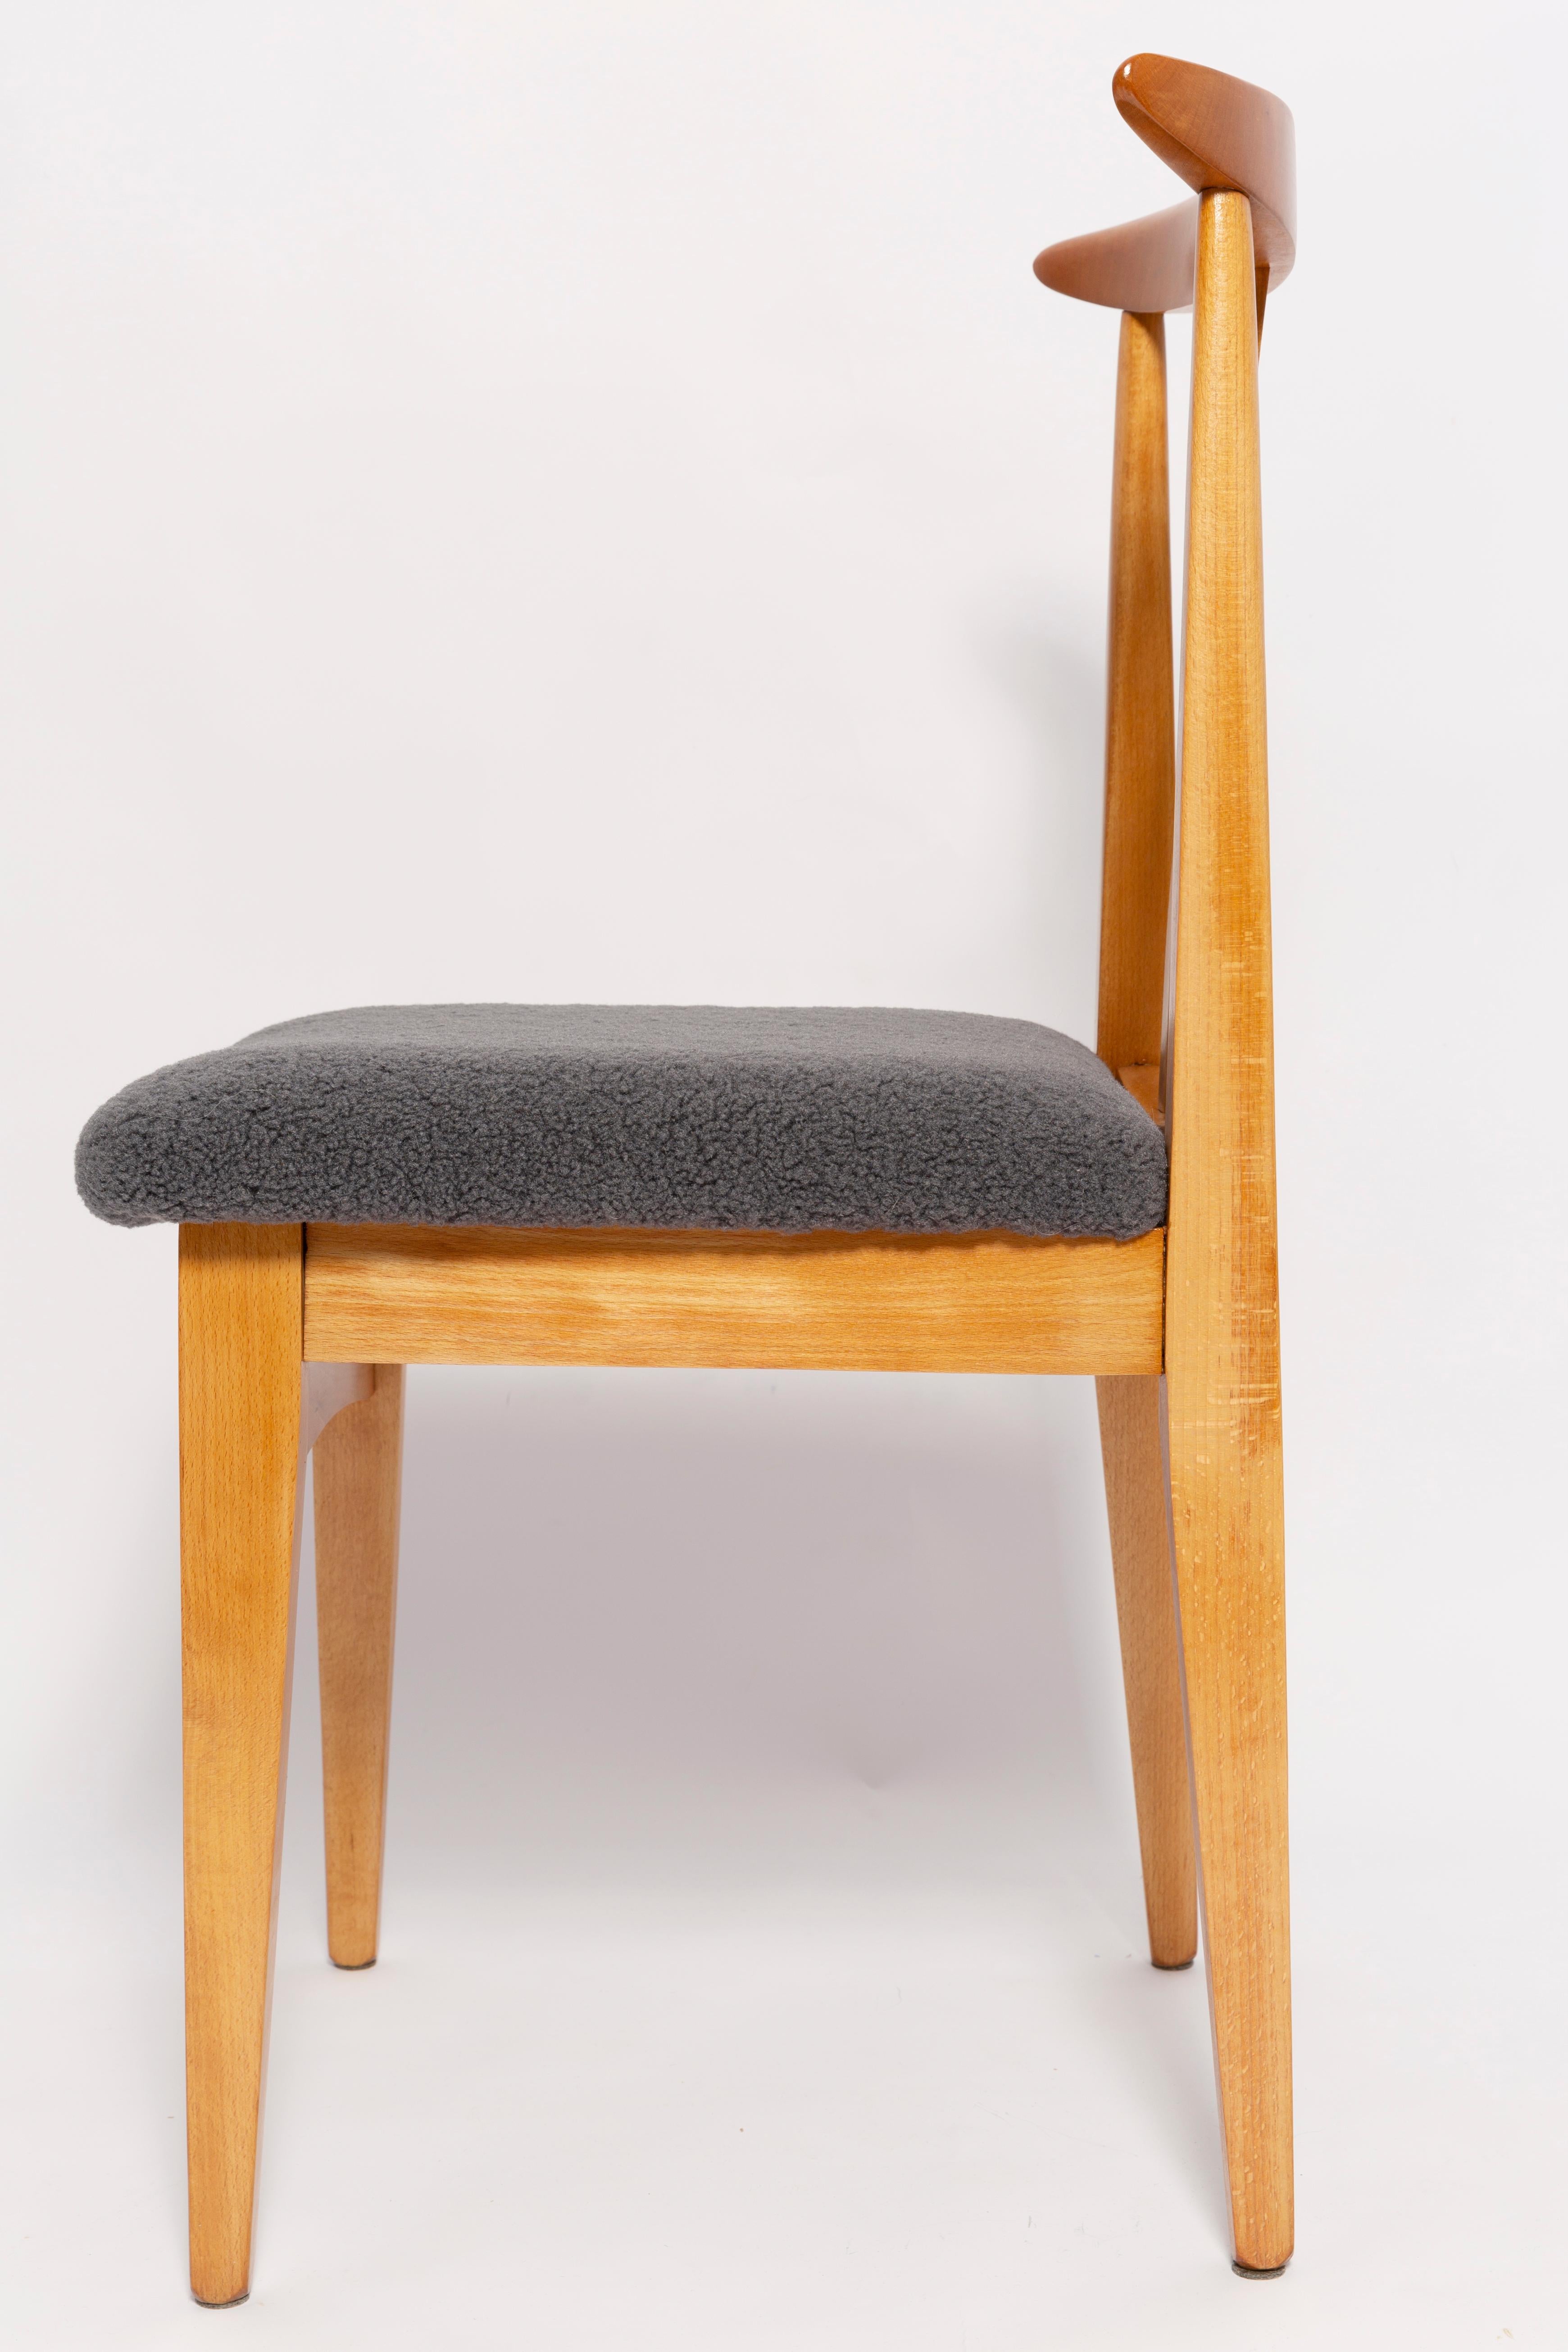 Hand-Crafted Eight Mid-Century Graphite Boucle Chairs, Light Wood, M Zielinski, Europe, 1960 For Sale